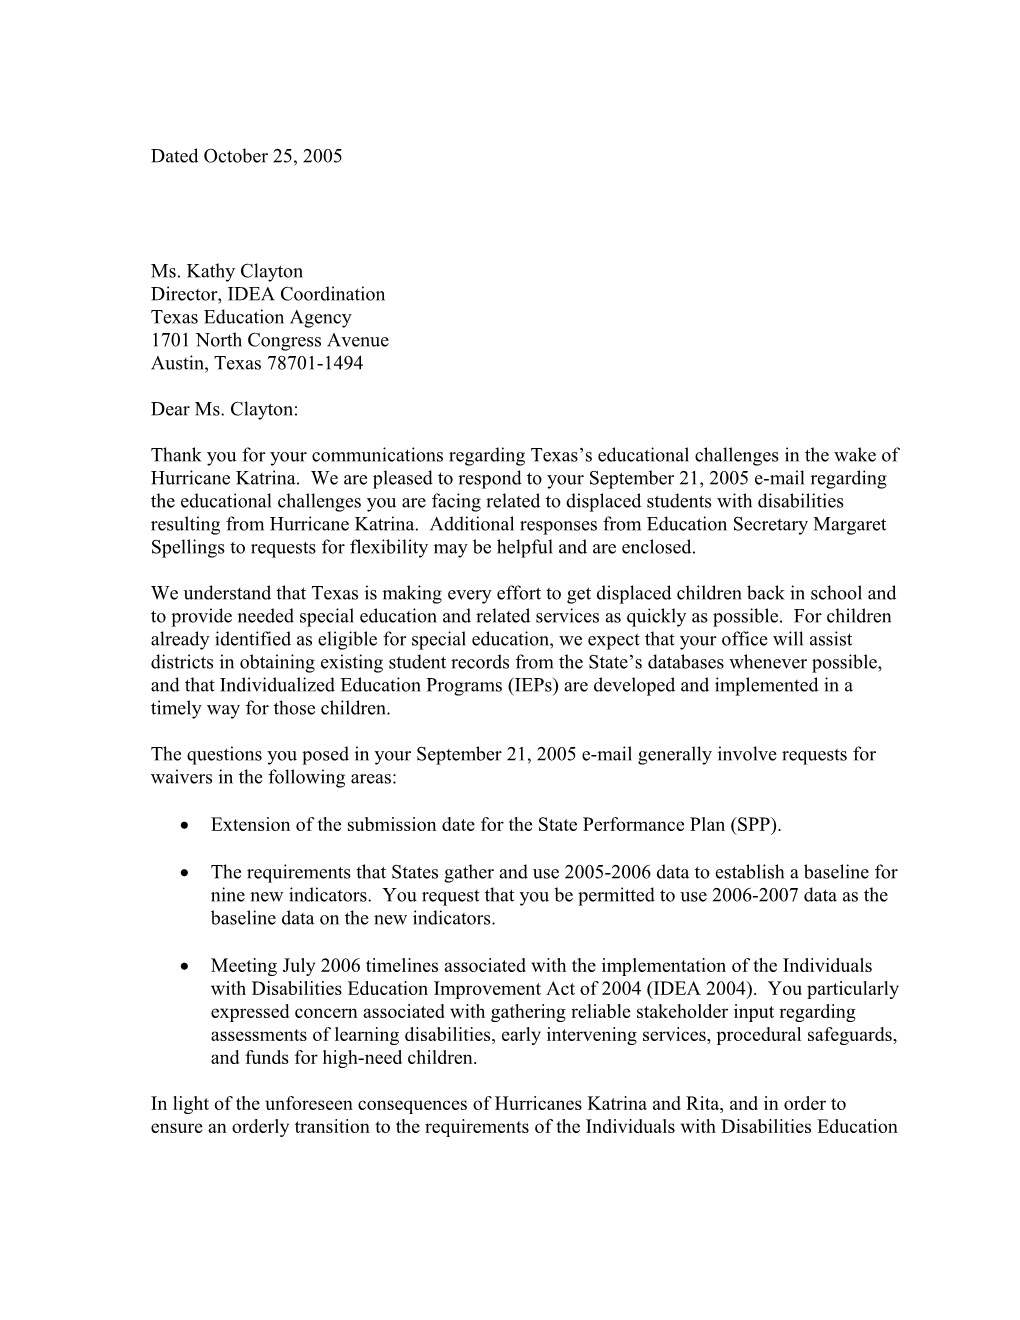 Letter Dated 10/25/05 to Clayton Re: Interpreting IDEA Or the Regulations That Implement